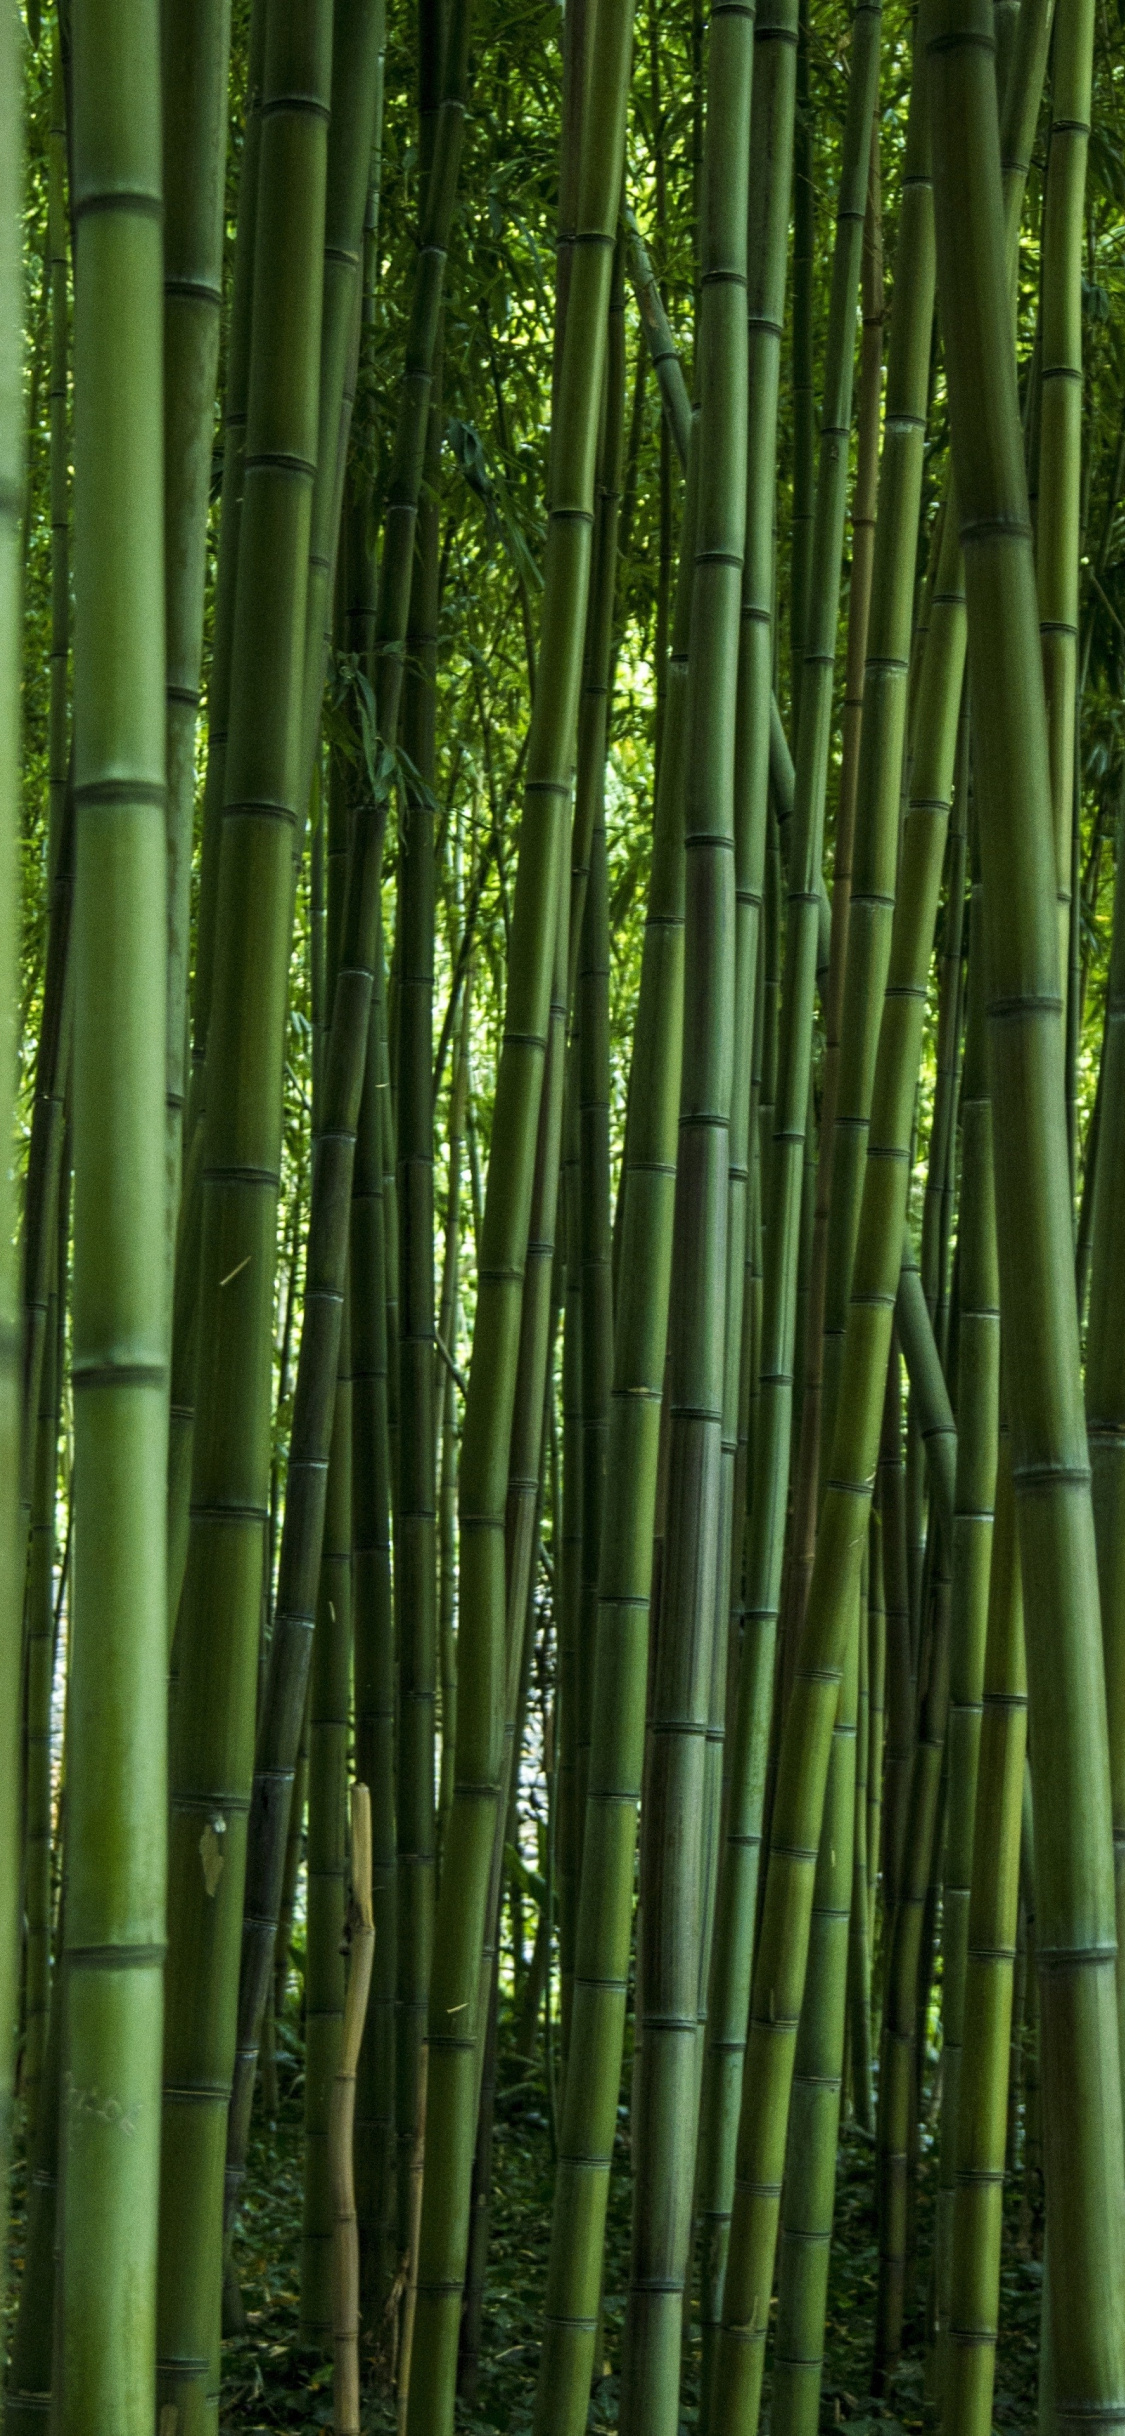 Green forest bamboo, Vibrant nature, Serene landscape, Iphone xhd background, 1130x2440 HD Phone